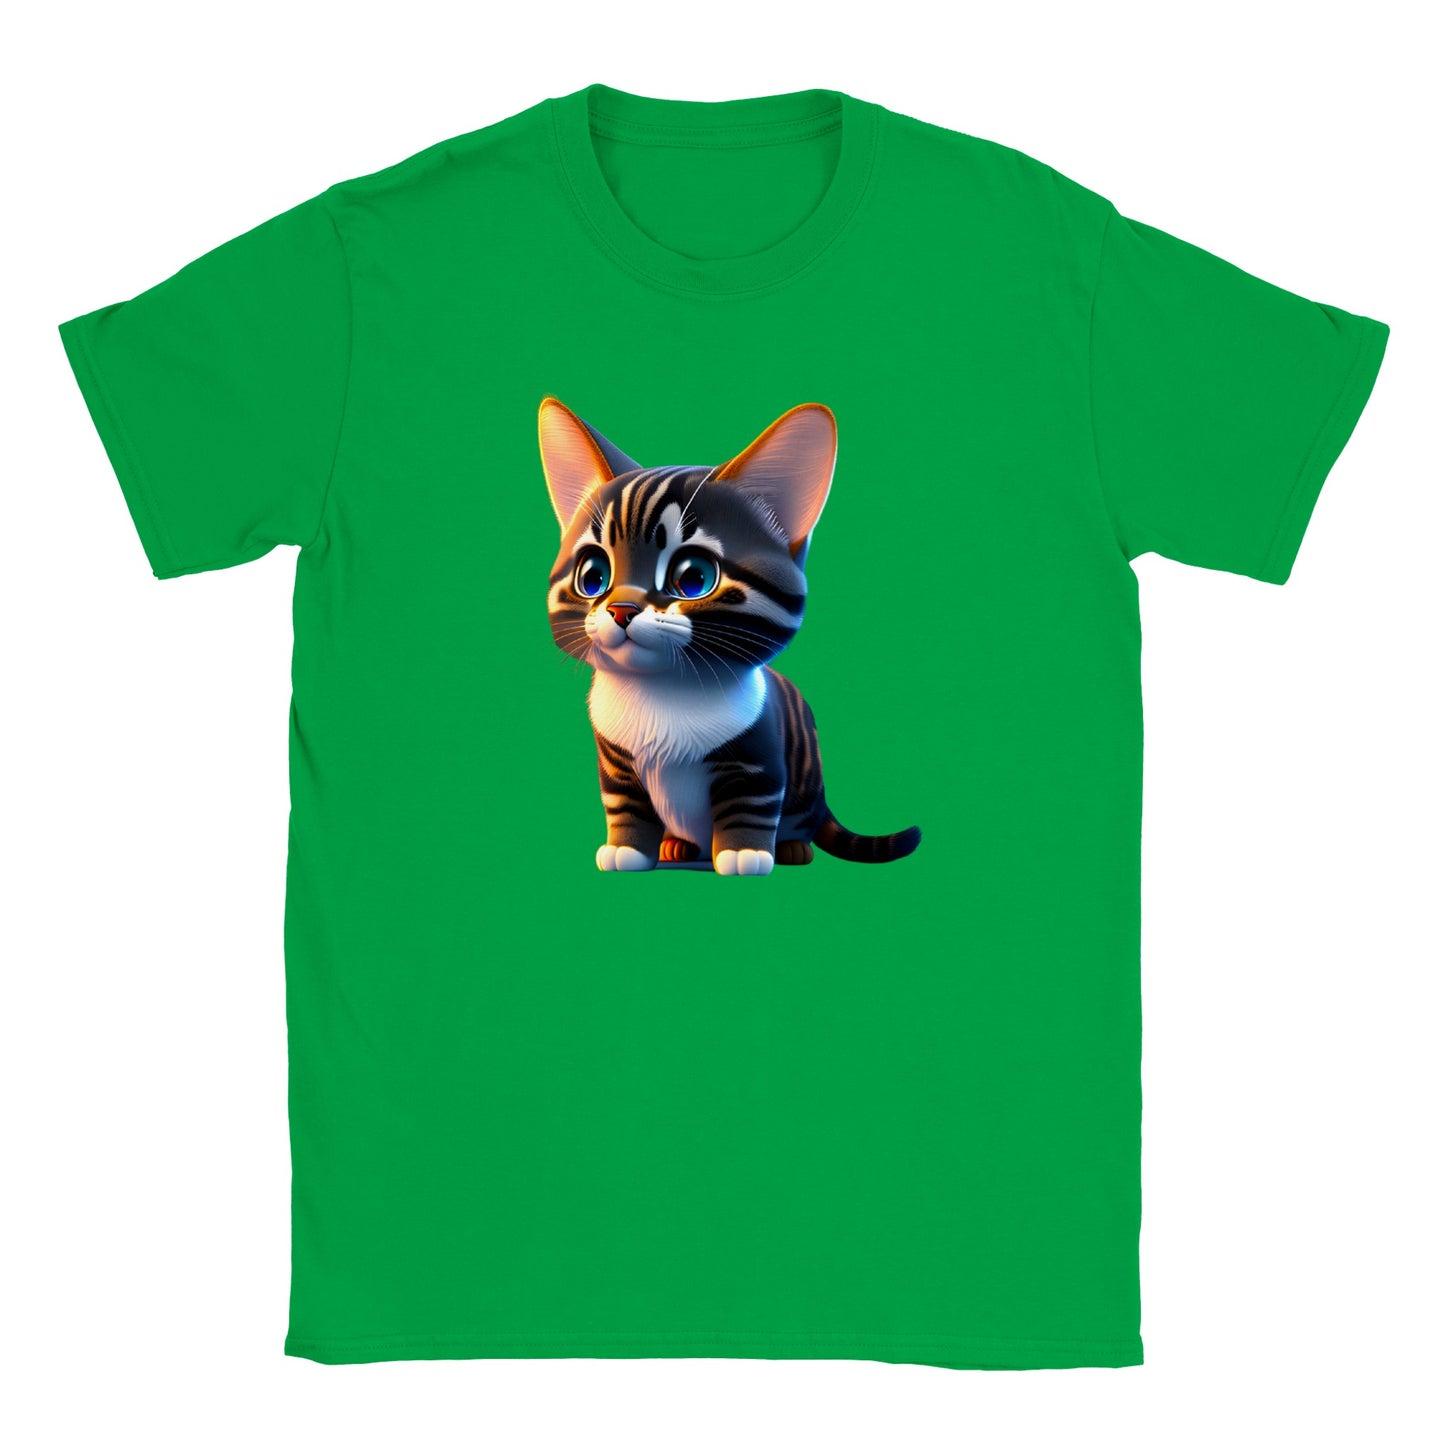 Adorable, Cool, Cute Cats and Kittens Toy - Classic Kids Crewneck T-Shirt 33